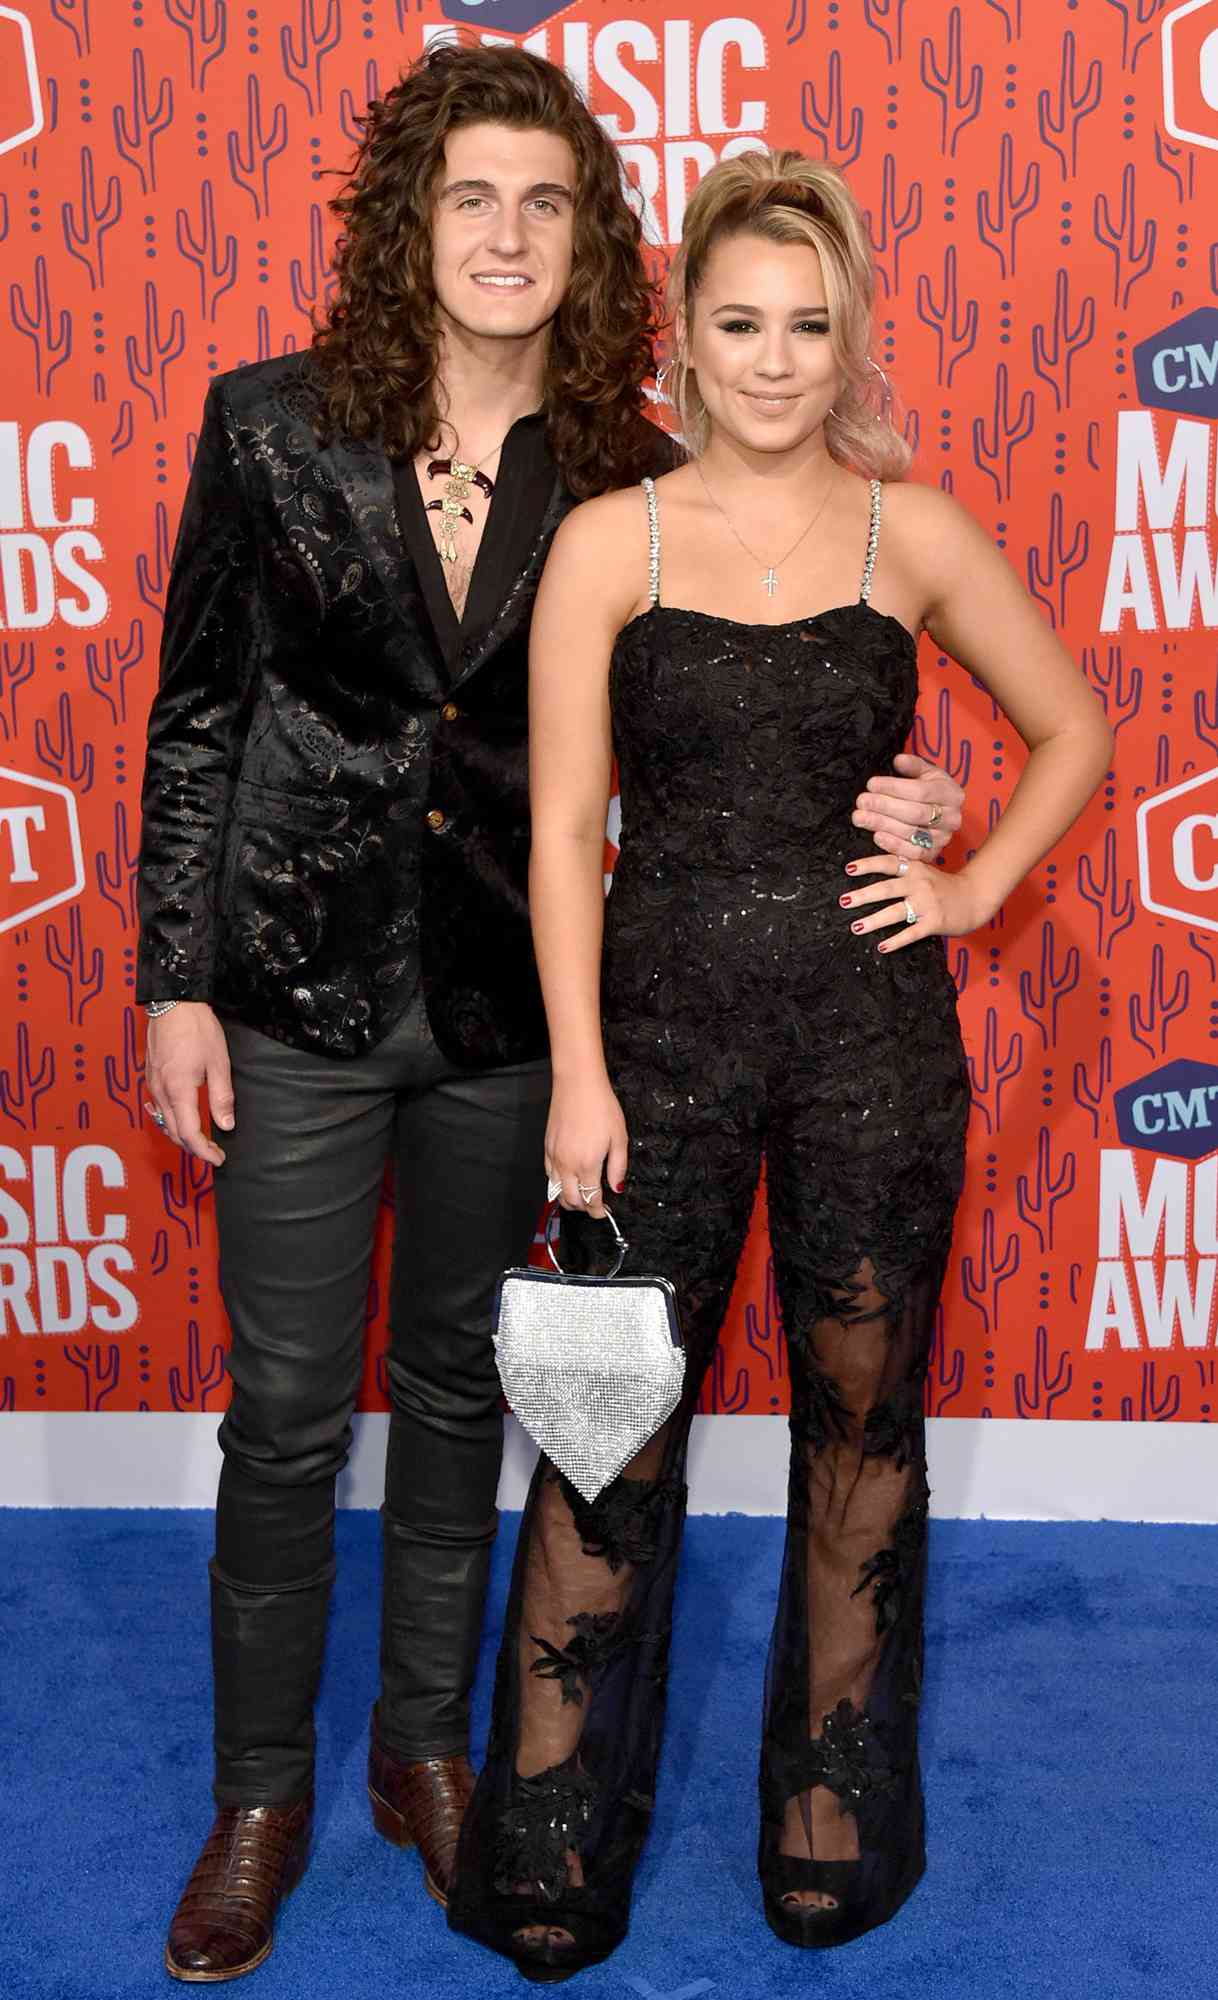 Cade Foehner and Gabby Barrett attend the 2019 CMT Music Awards at Bridgestone Arena on June 05, 2019 in Nashville, Tennessee